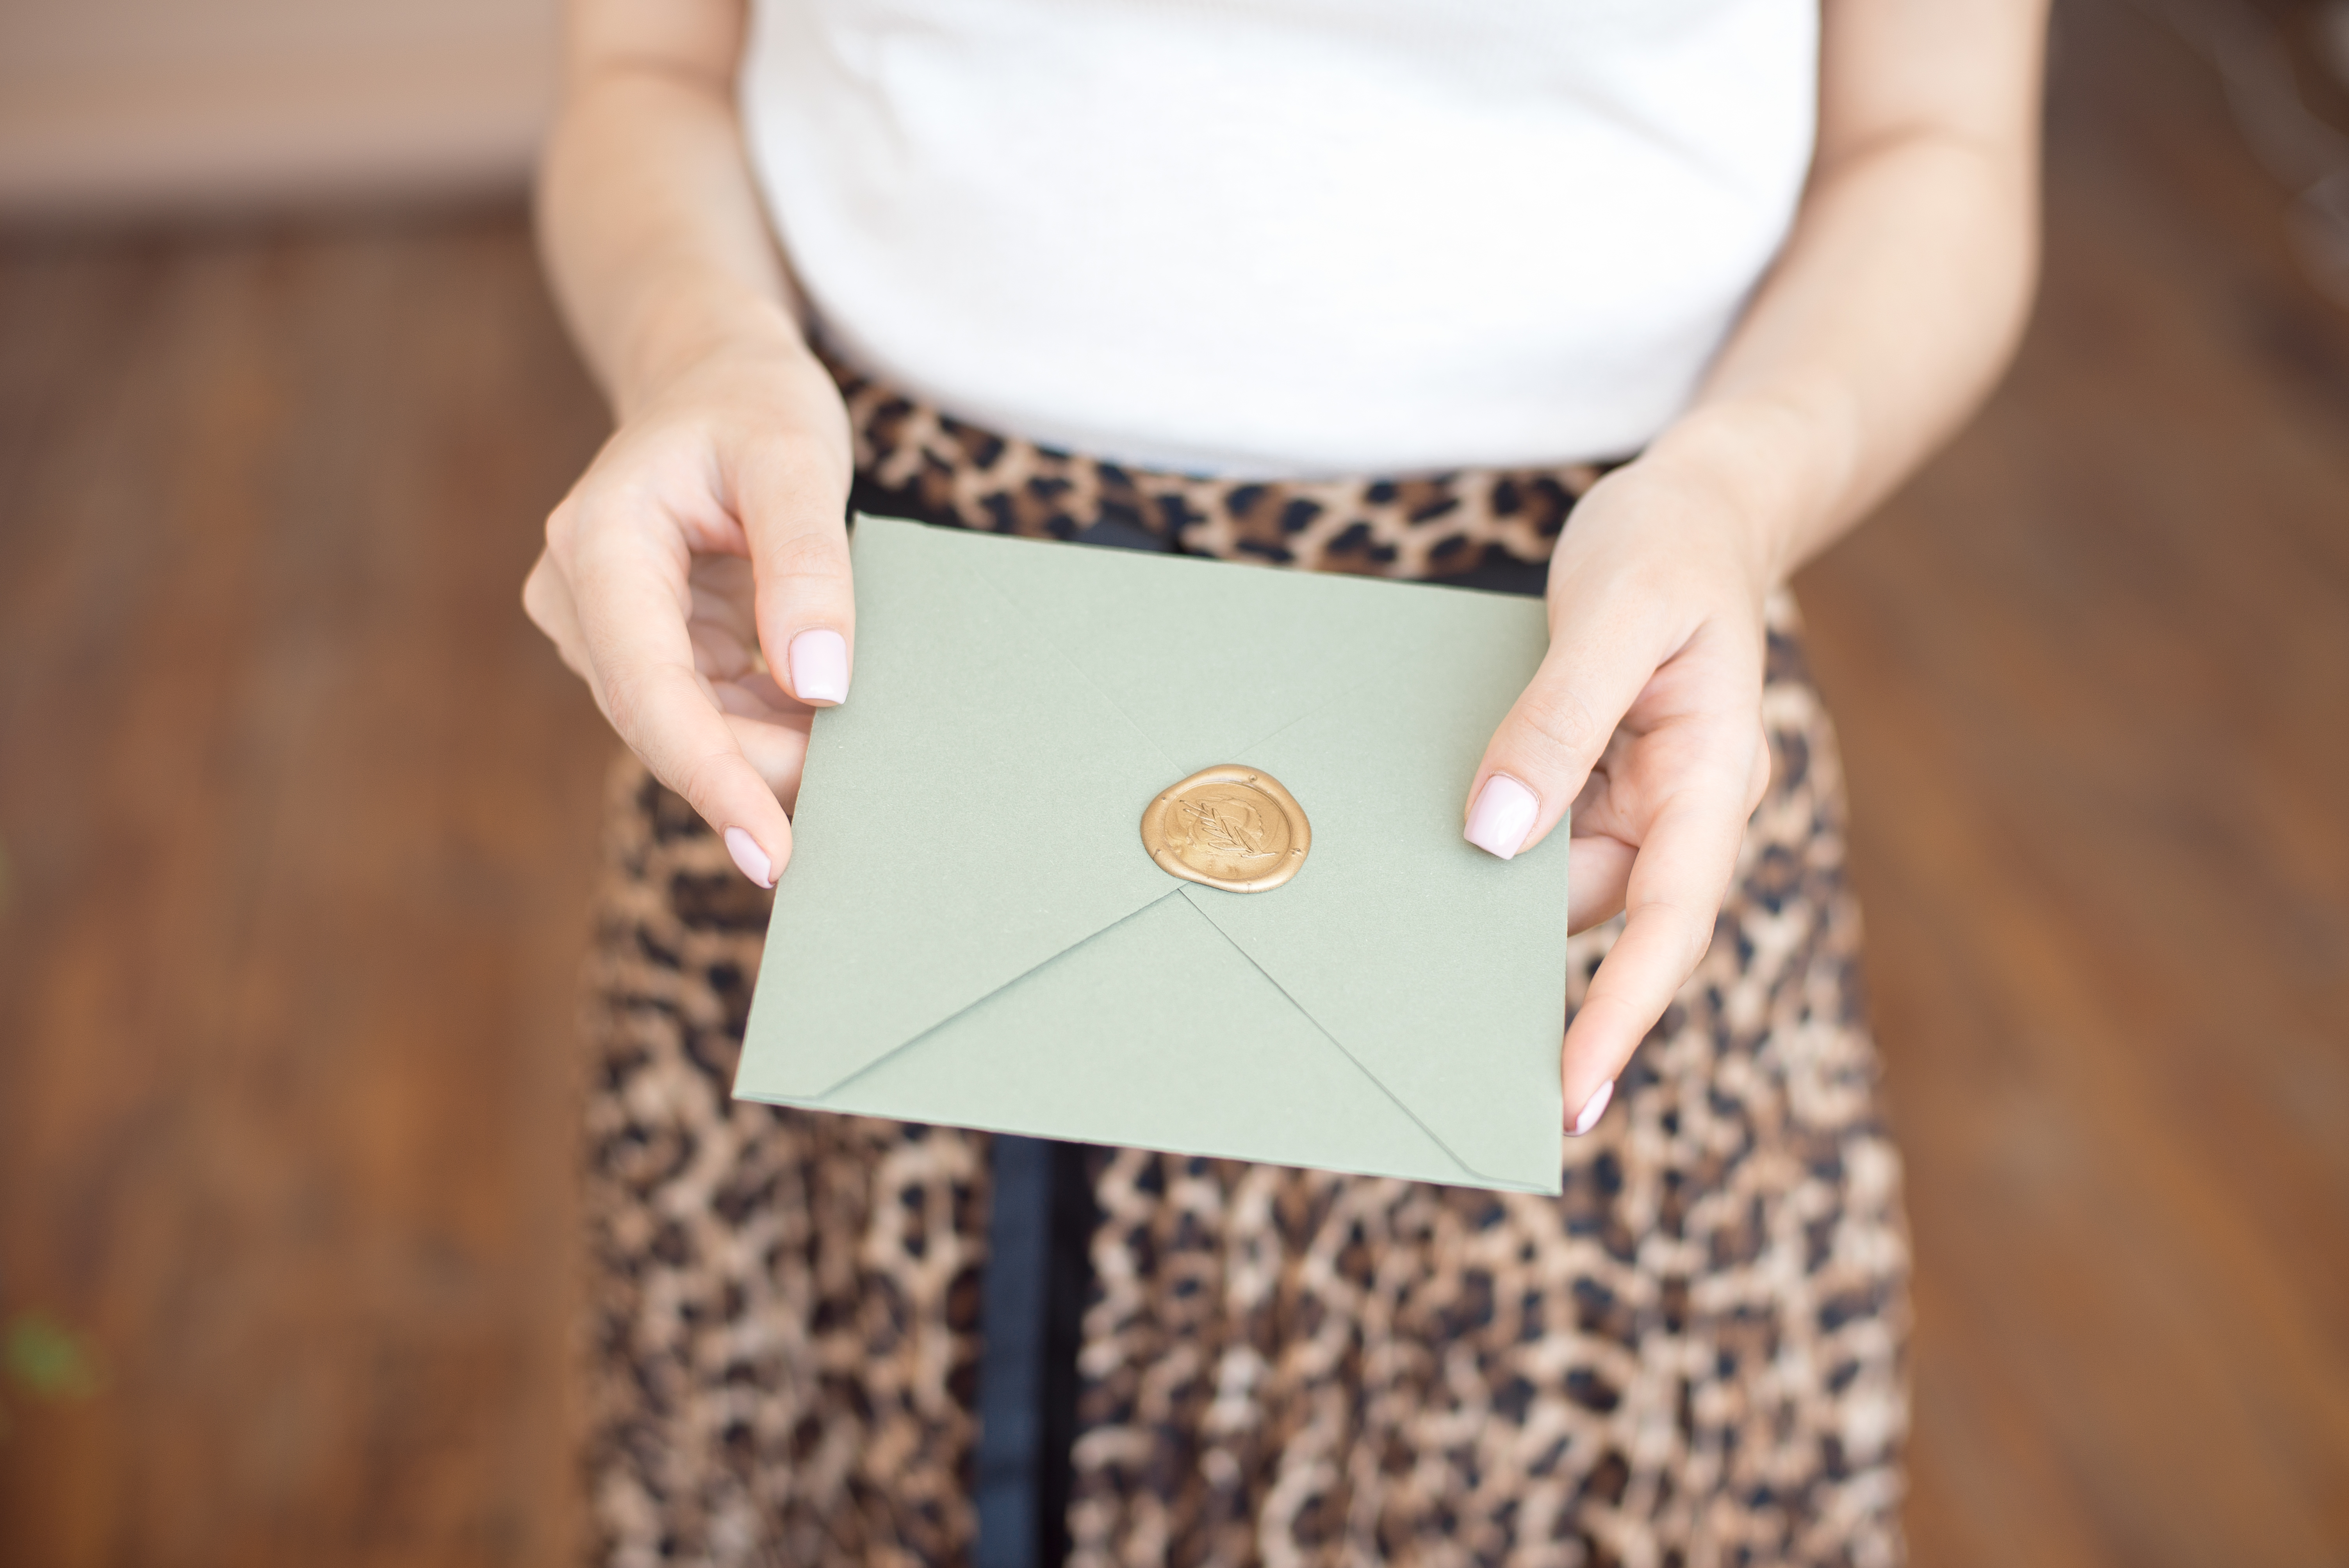 A woman holding a sealed envelope | Source: Shutterstock